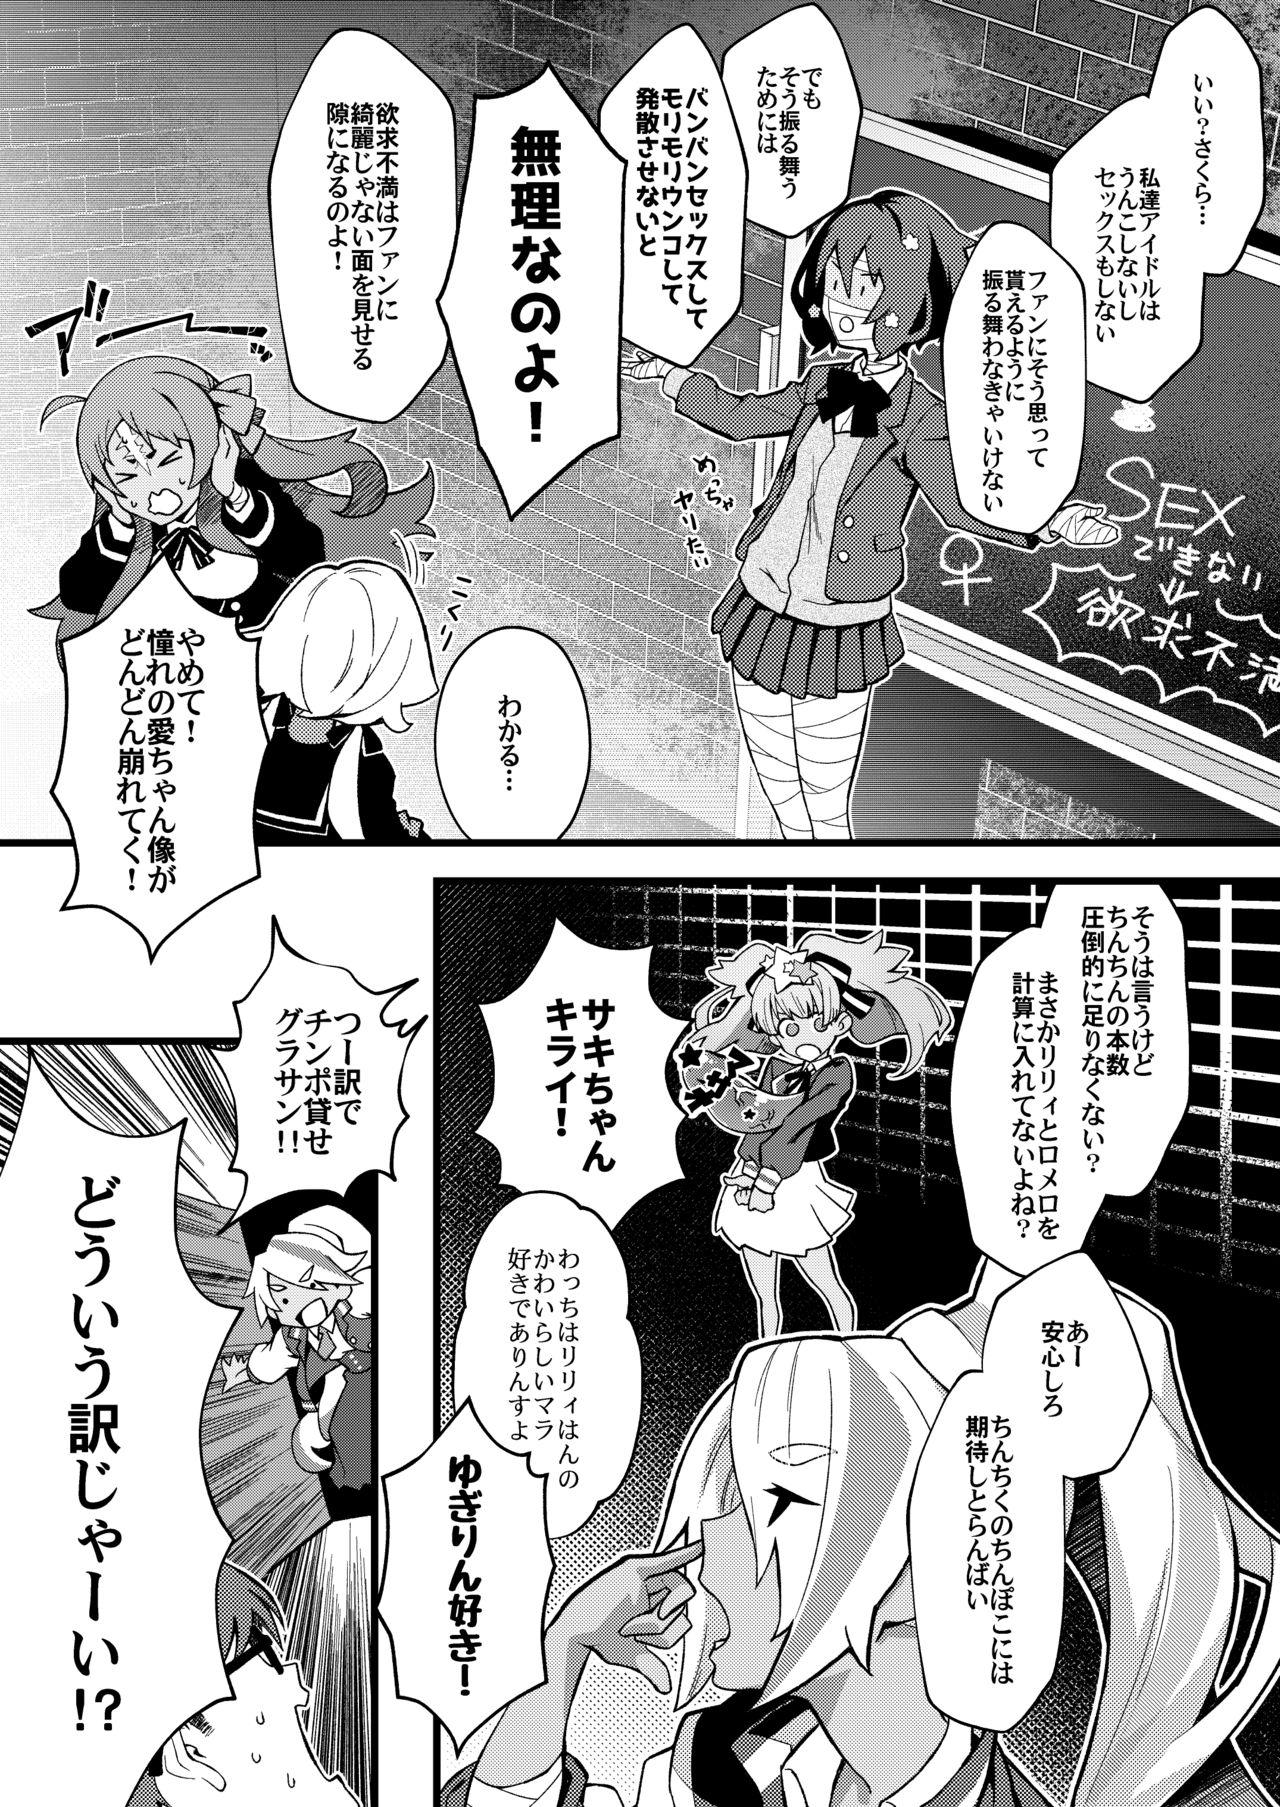 Large zombie and sex - Zombie land saga Whipping - Page 4